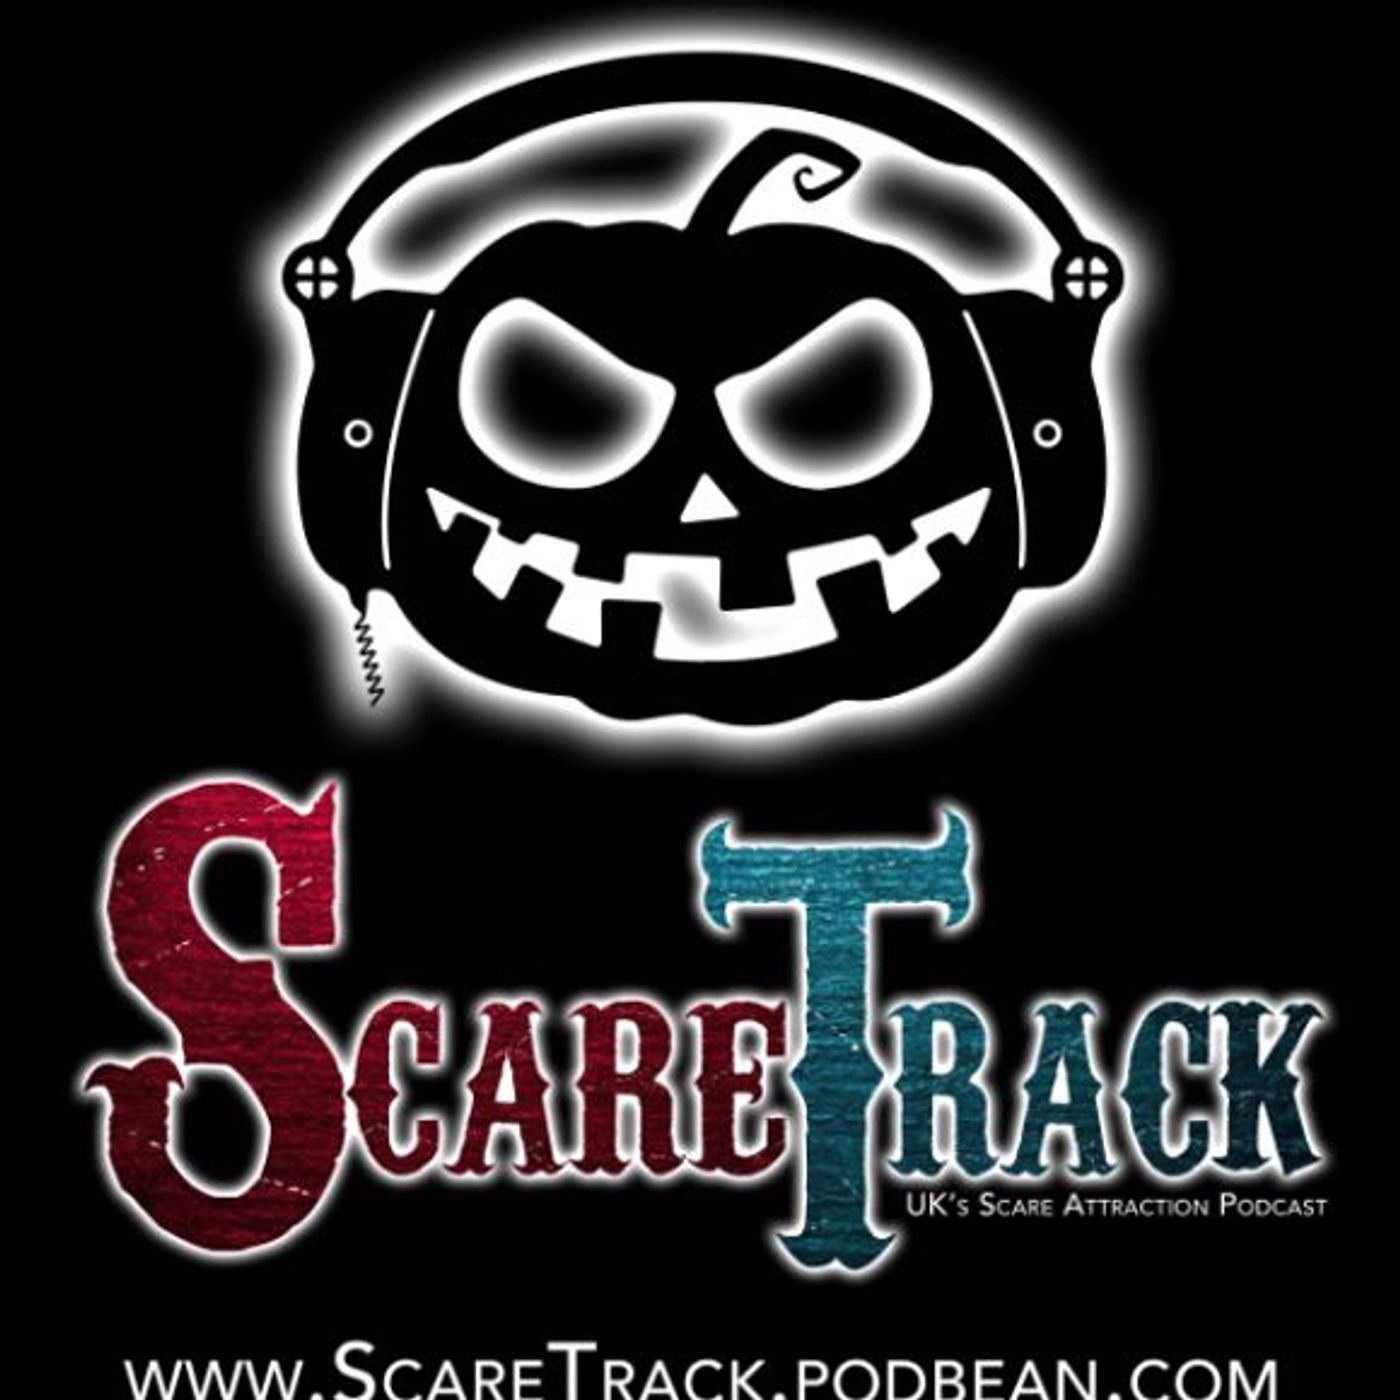 [Scaretrack] Episode 134: Alcohol at Scare attractions. Yes or No?